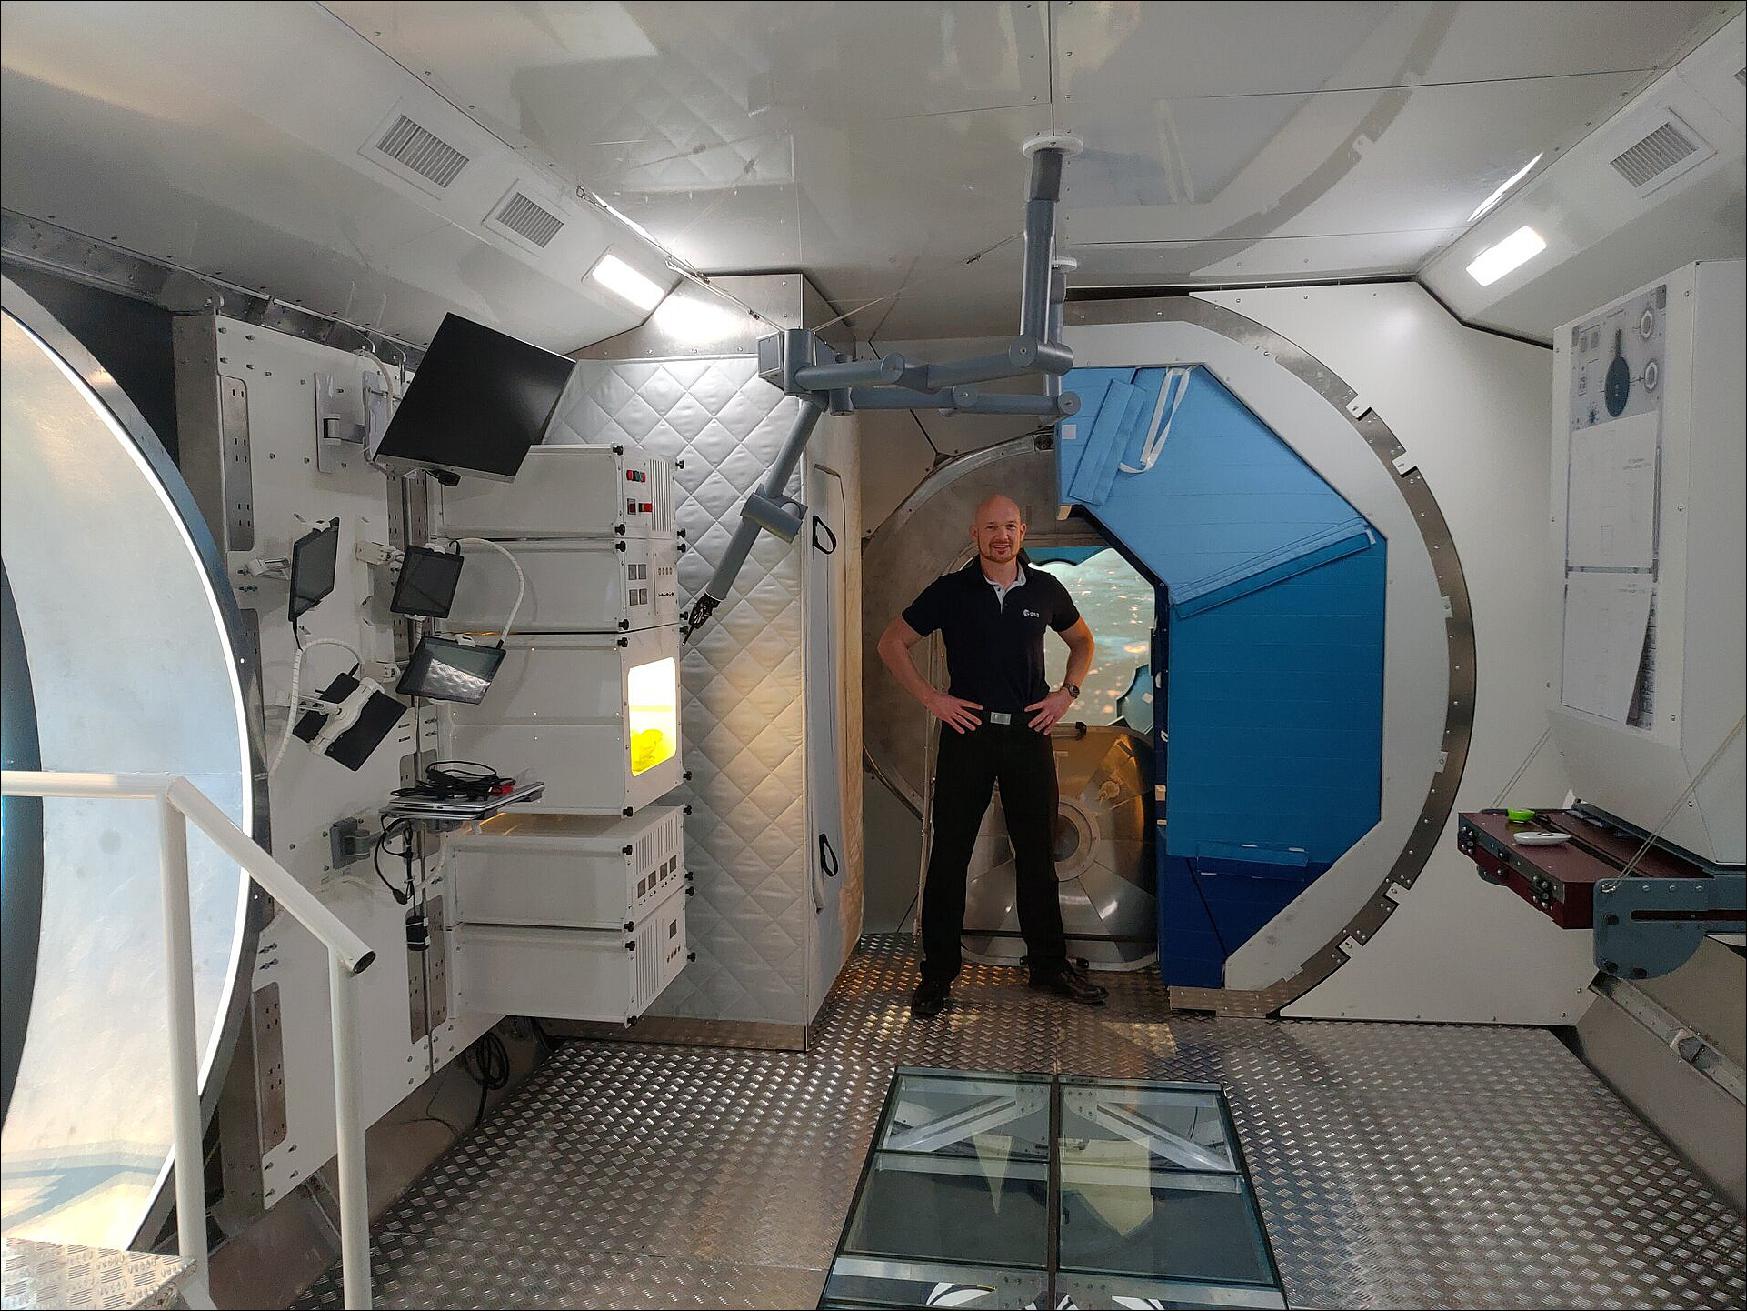 Figure 3: Photo of Alexander Gerst in the new I-Hab at Thales Alenia Space in Turin (image credit: Thales Alenia Space)